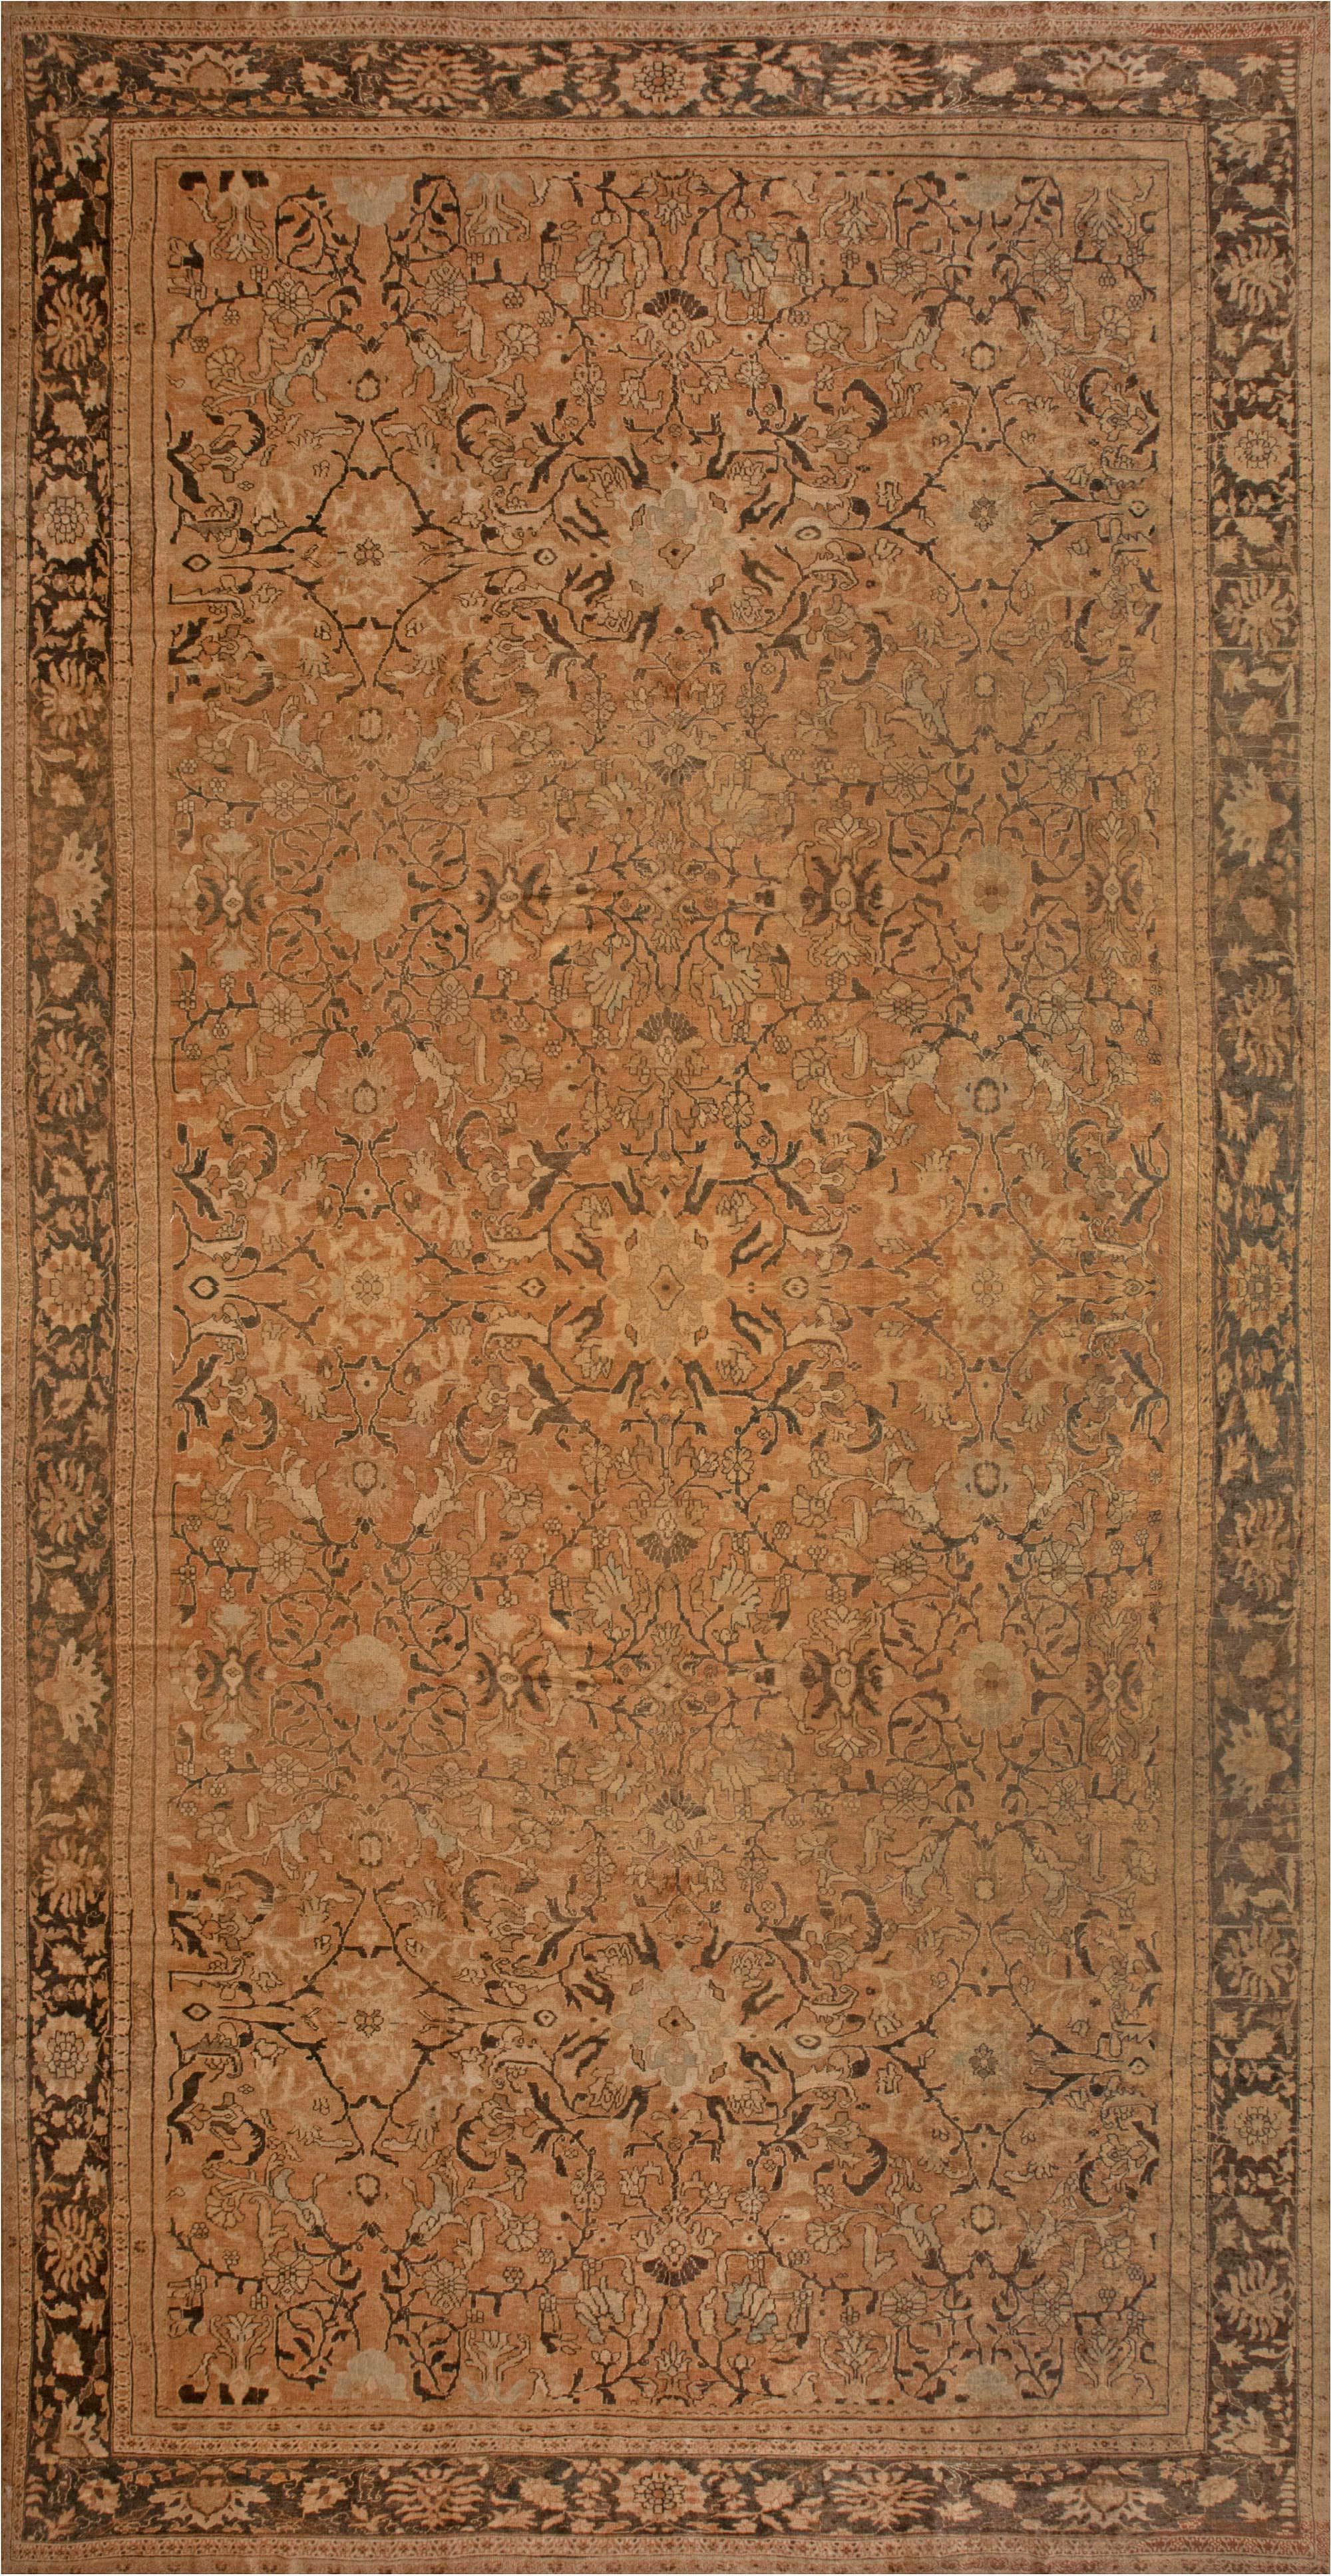 Authentic 19th Century Persian Sultanabad Rug